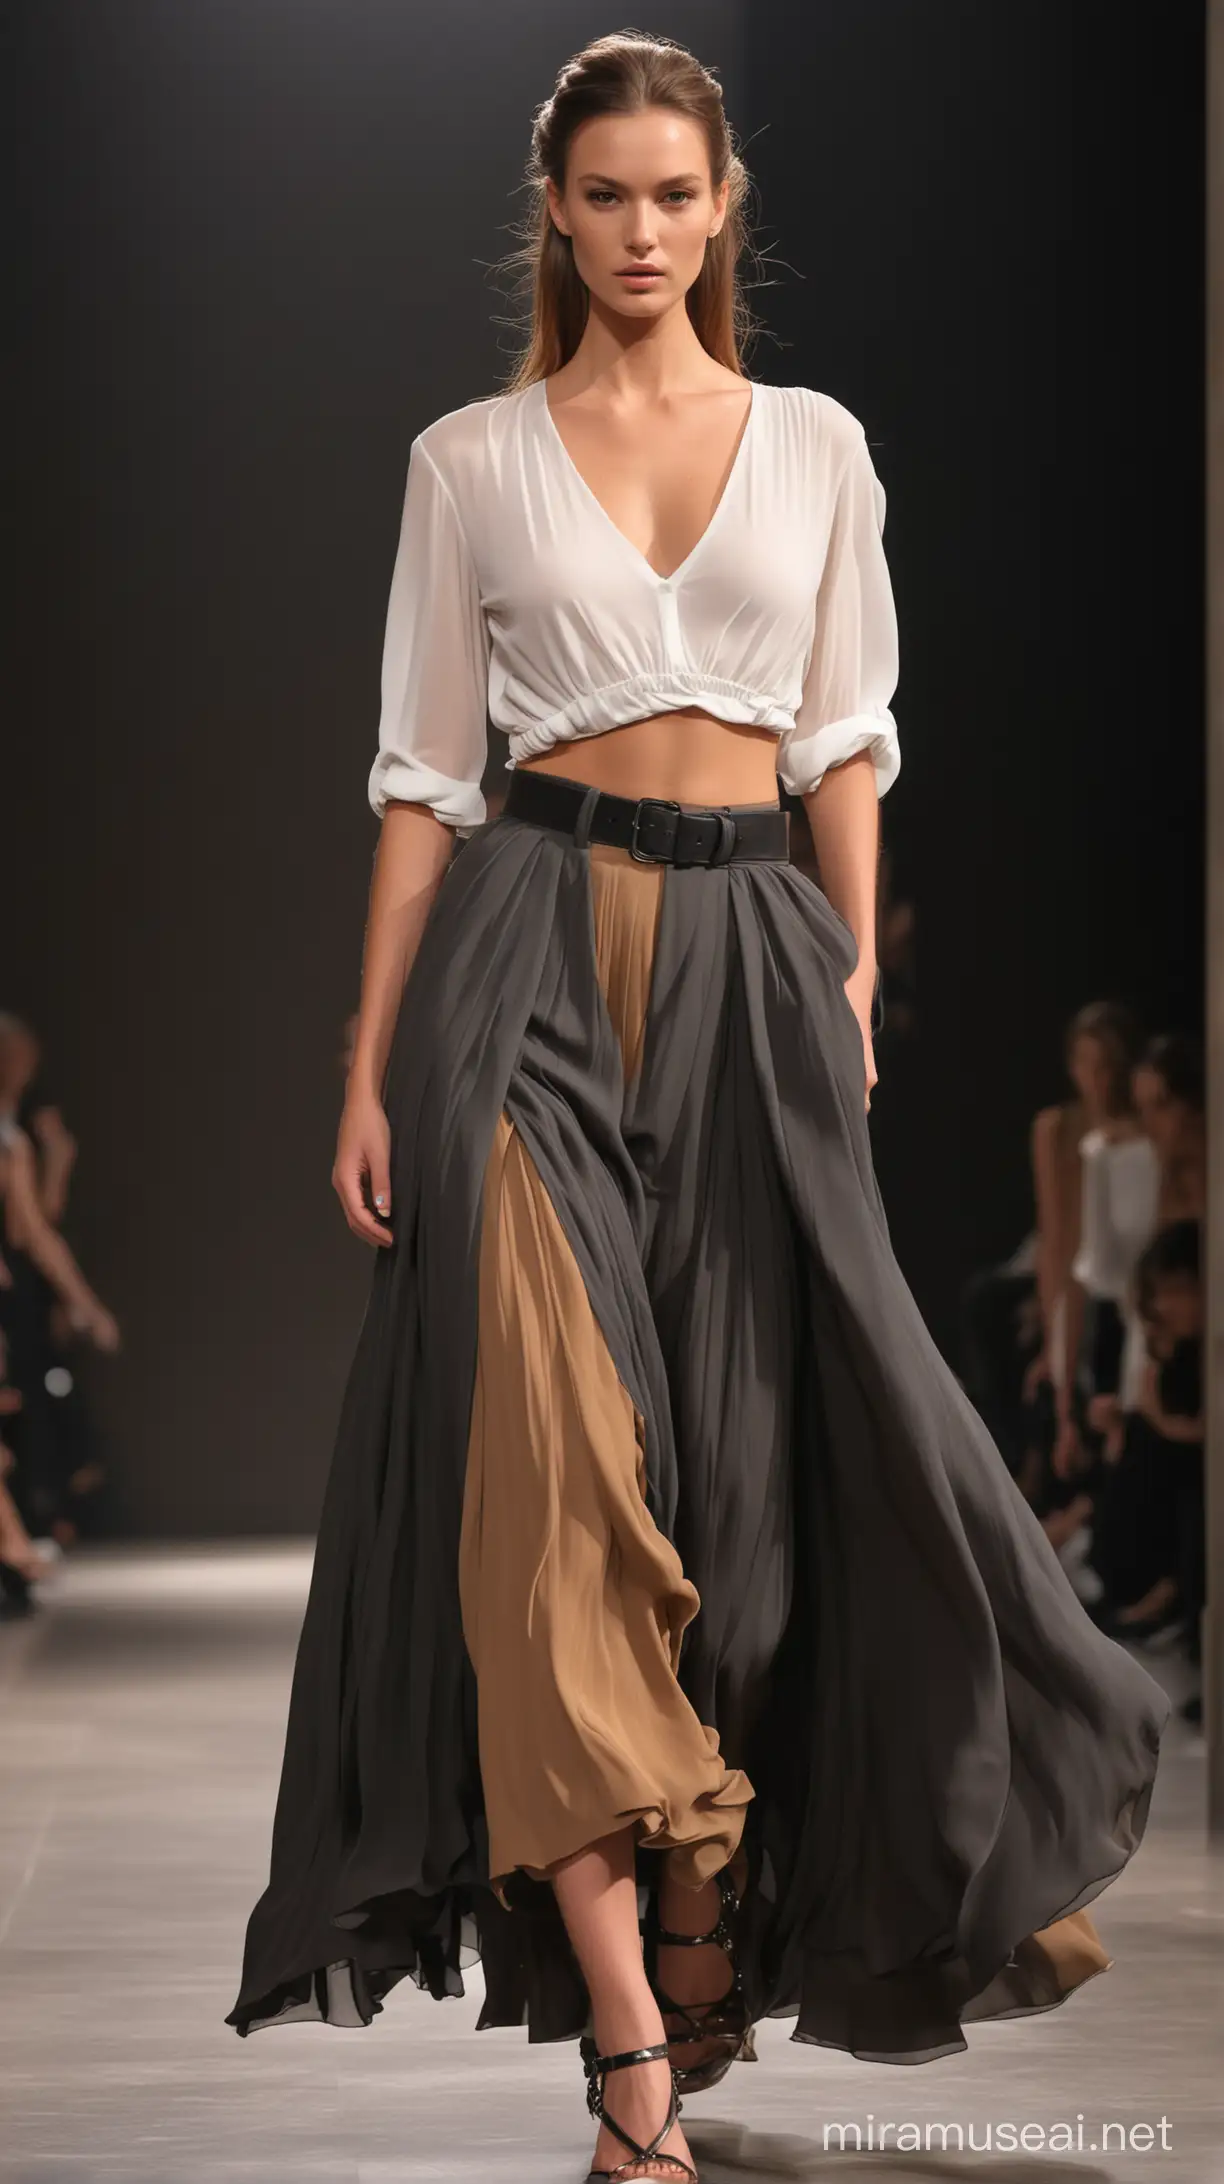 Stunning supermodel runway motion for Montelago brand, front angle, wearing white top and very long flowy, 2 colors(camel and black charcoal) chiffon skirt, hands in the pockets , hyper-realistic, Alexander McQueen style